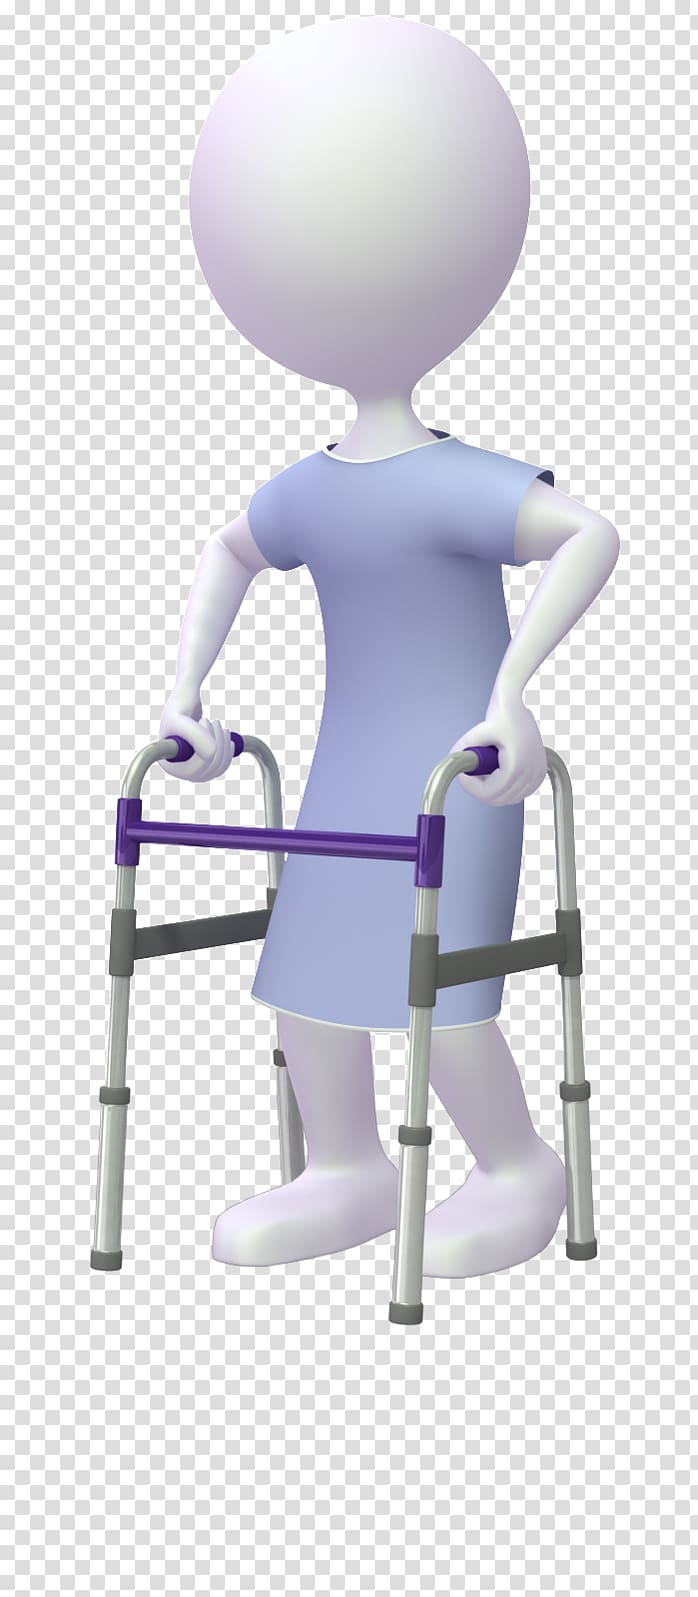 Chair Plastic Medical Equipment, chair transparent background PNG clipart